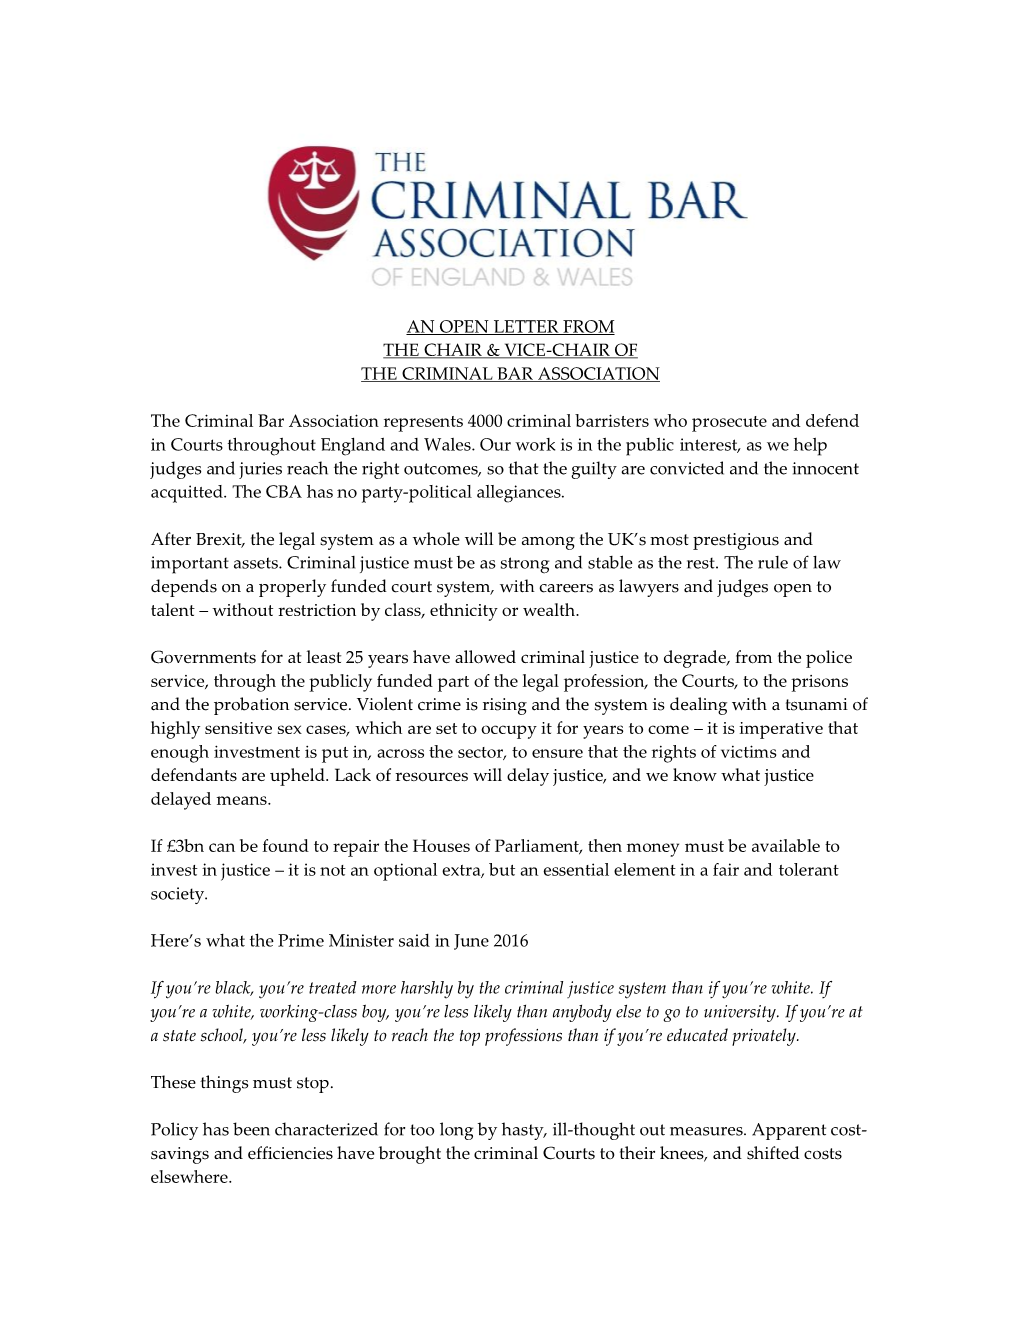 AN OPEN LETTER from the CHAIR & VICE-CHAIR of the CRIMINAL BAR ASSOCIATION the Criminal Bar Association Represents 4000 Cr